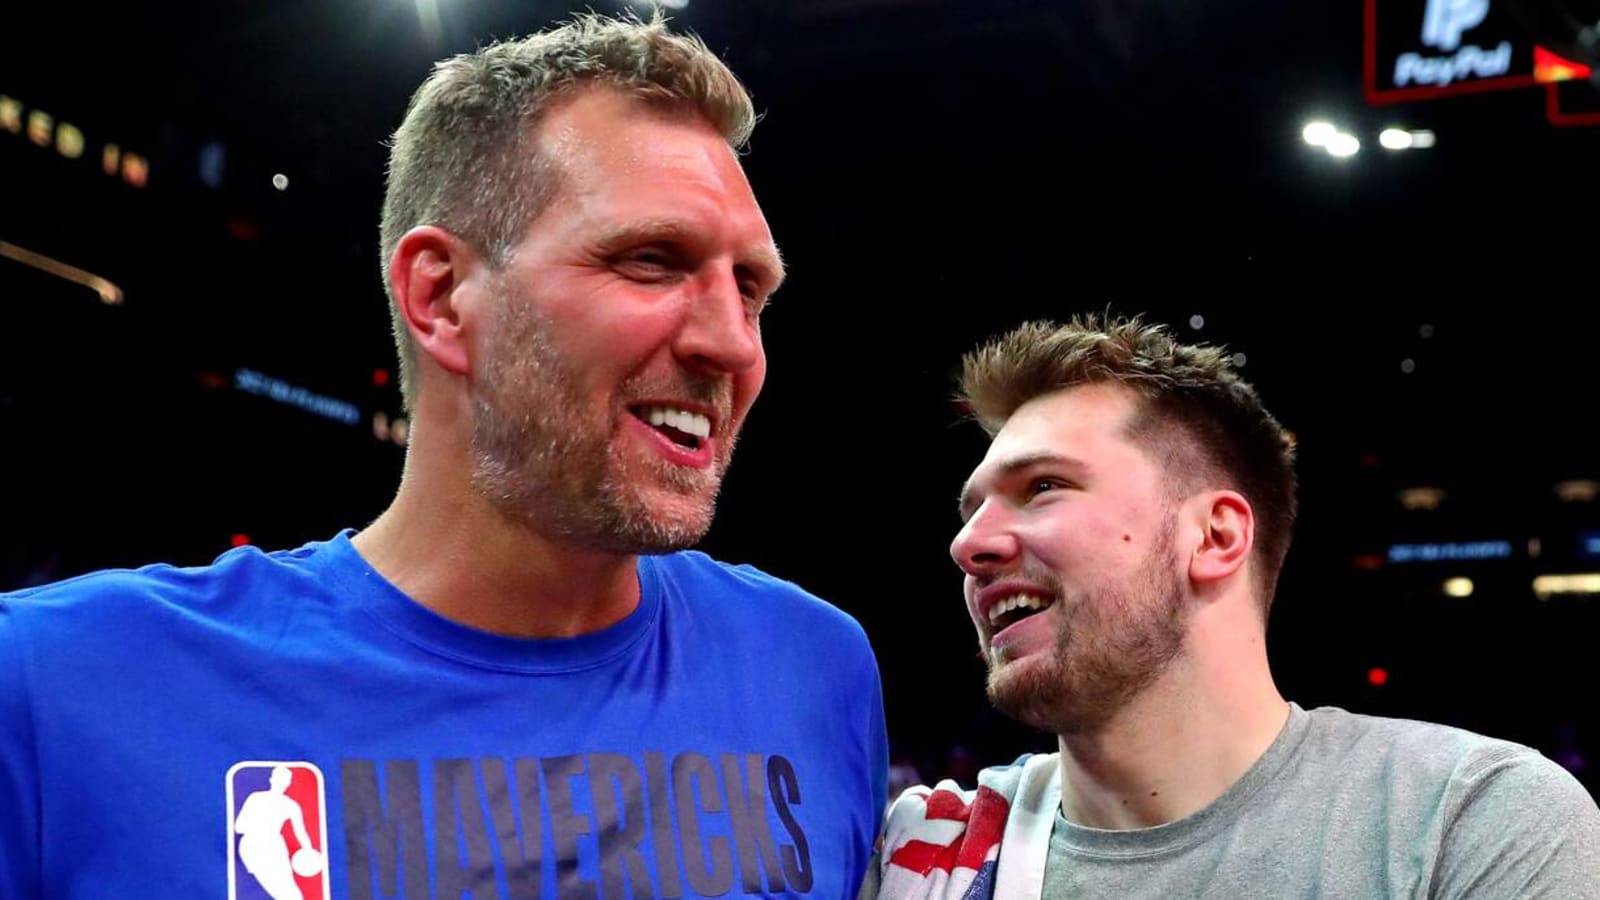 Watch: Dirk Nowitzki joins in chant aimed at Luka Doncic